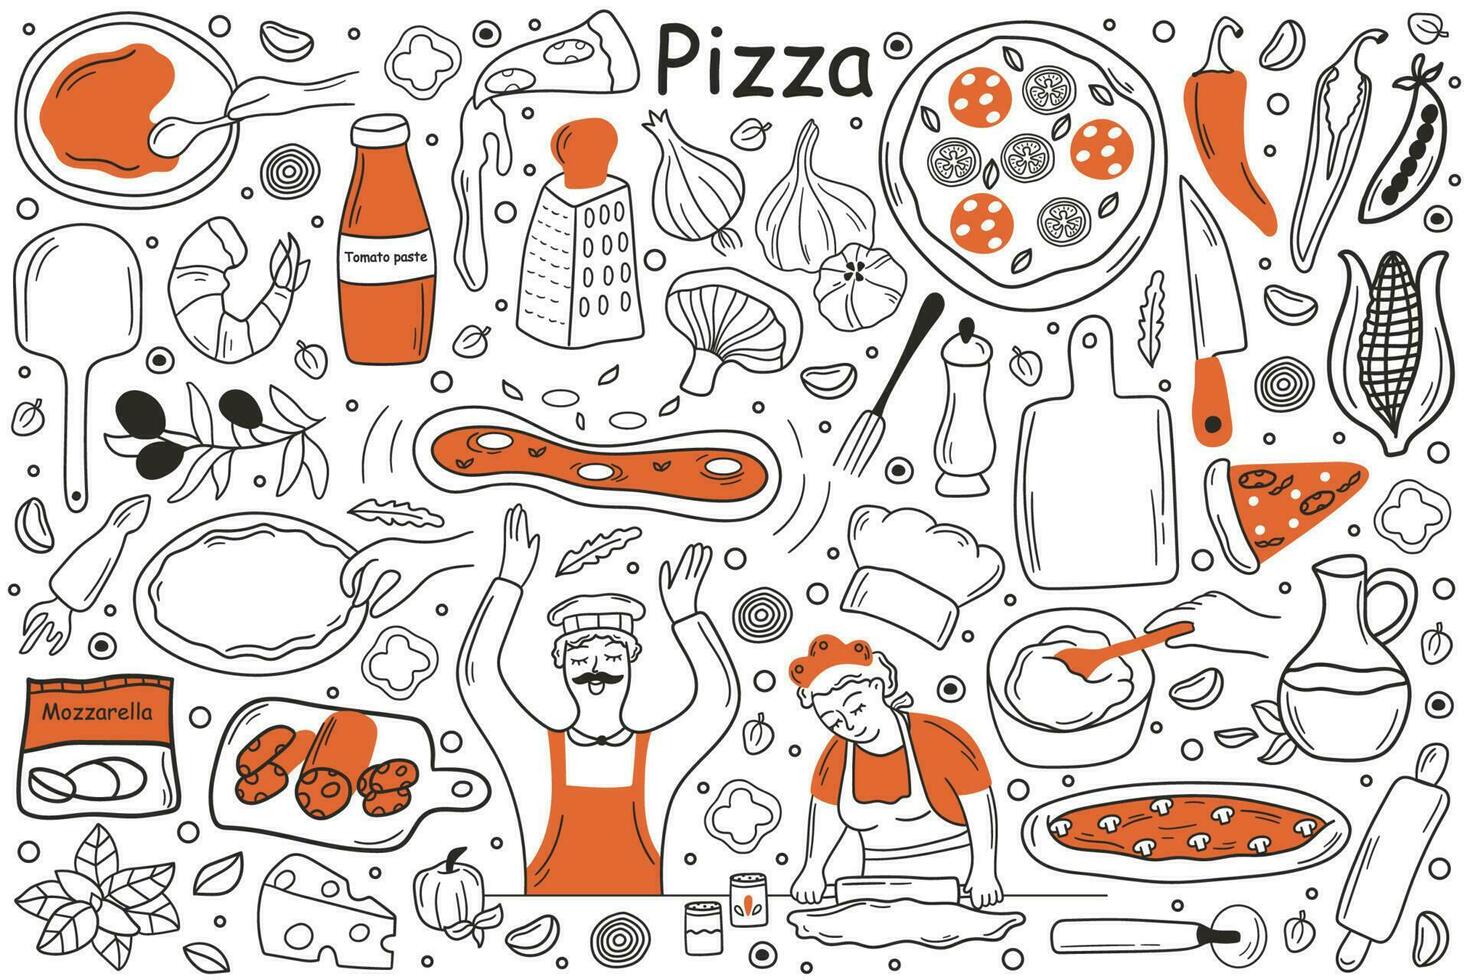 Pizza doodle set. Collection of hand drawn sketches templates patterns of man cooker chef holding pepperoni in kitchen. Cooking italian cuisine for lunch and unhealthy fasfood nutrition illustration. vector